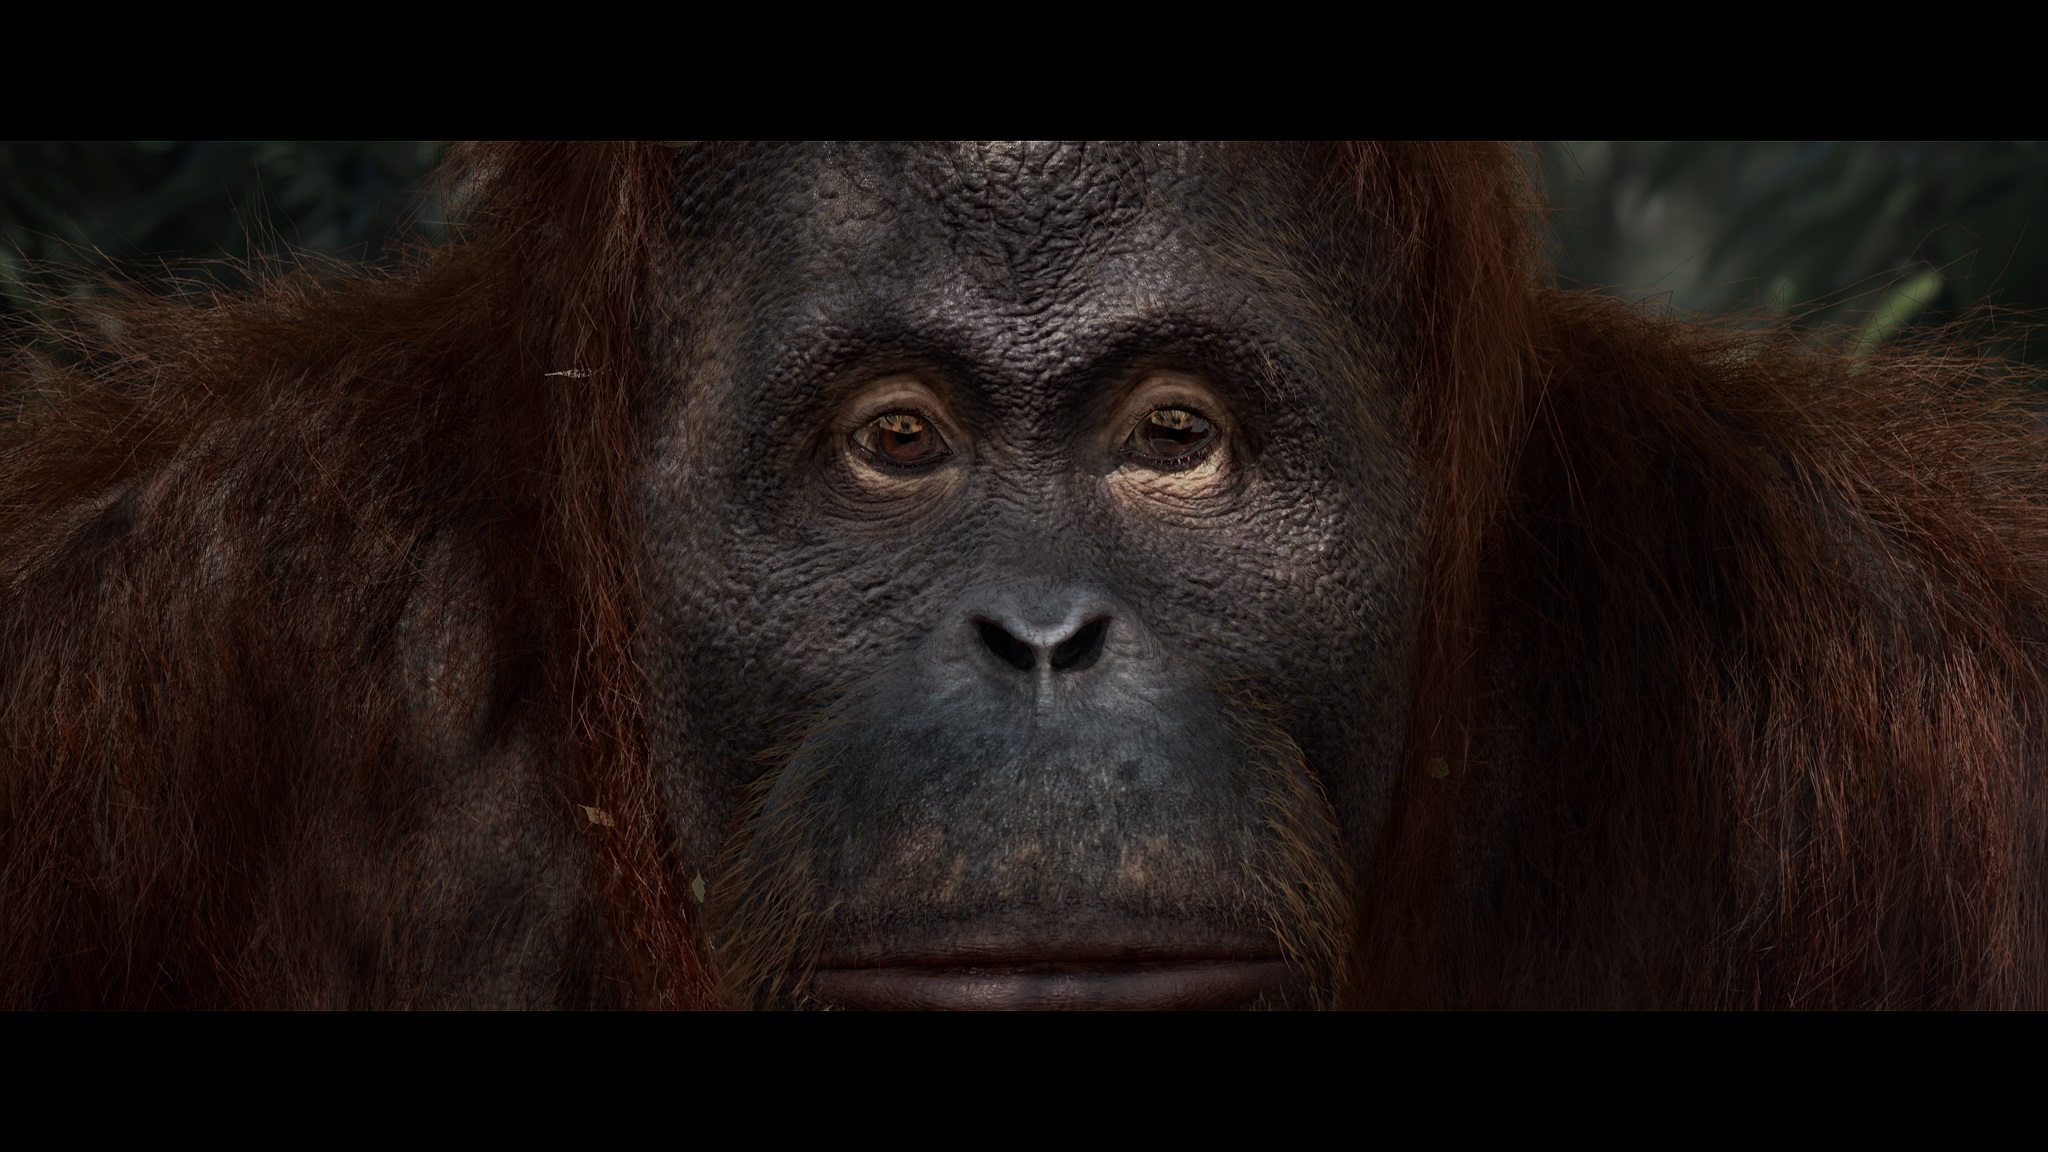 Shot from the VES Student Award winning film, Green, showing the orangutan's facial expression.